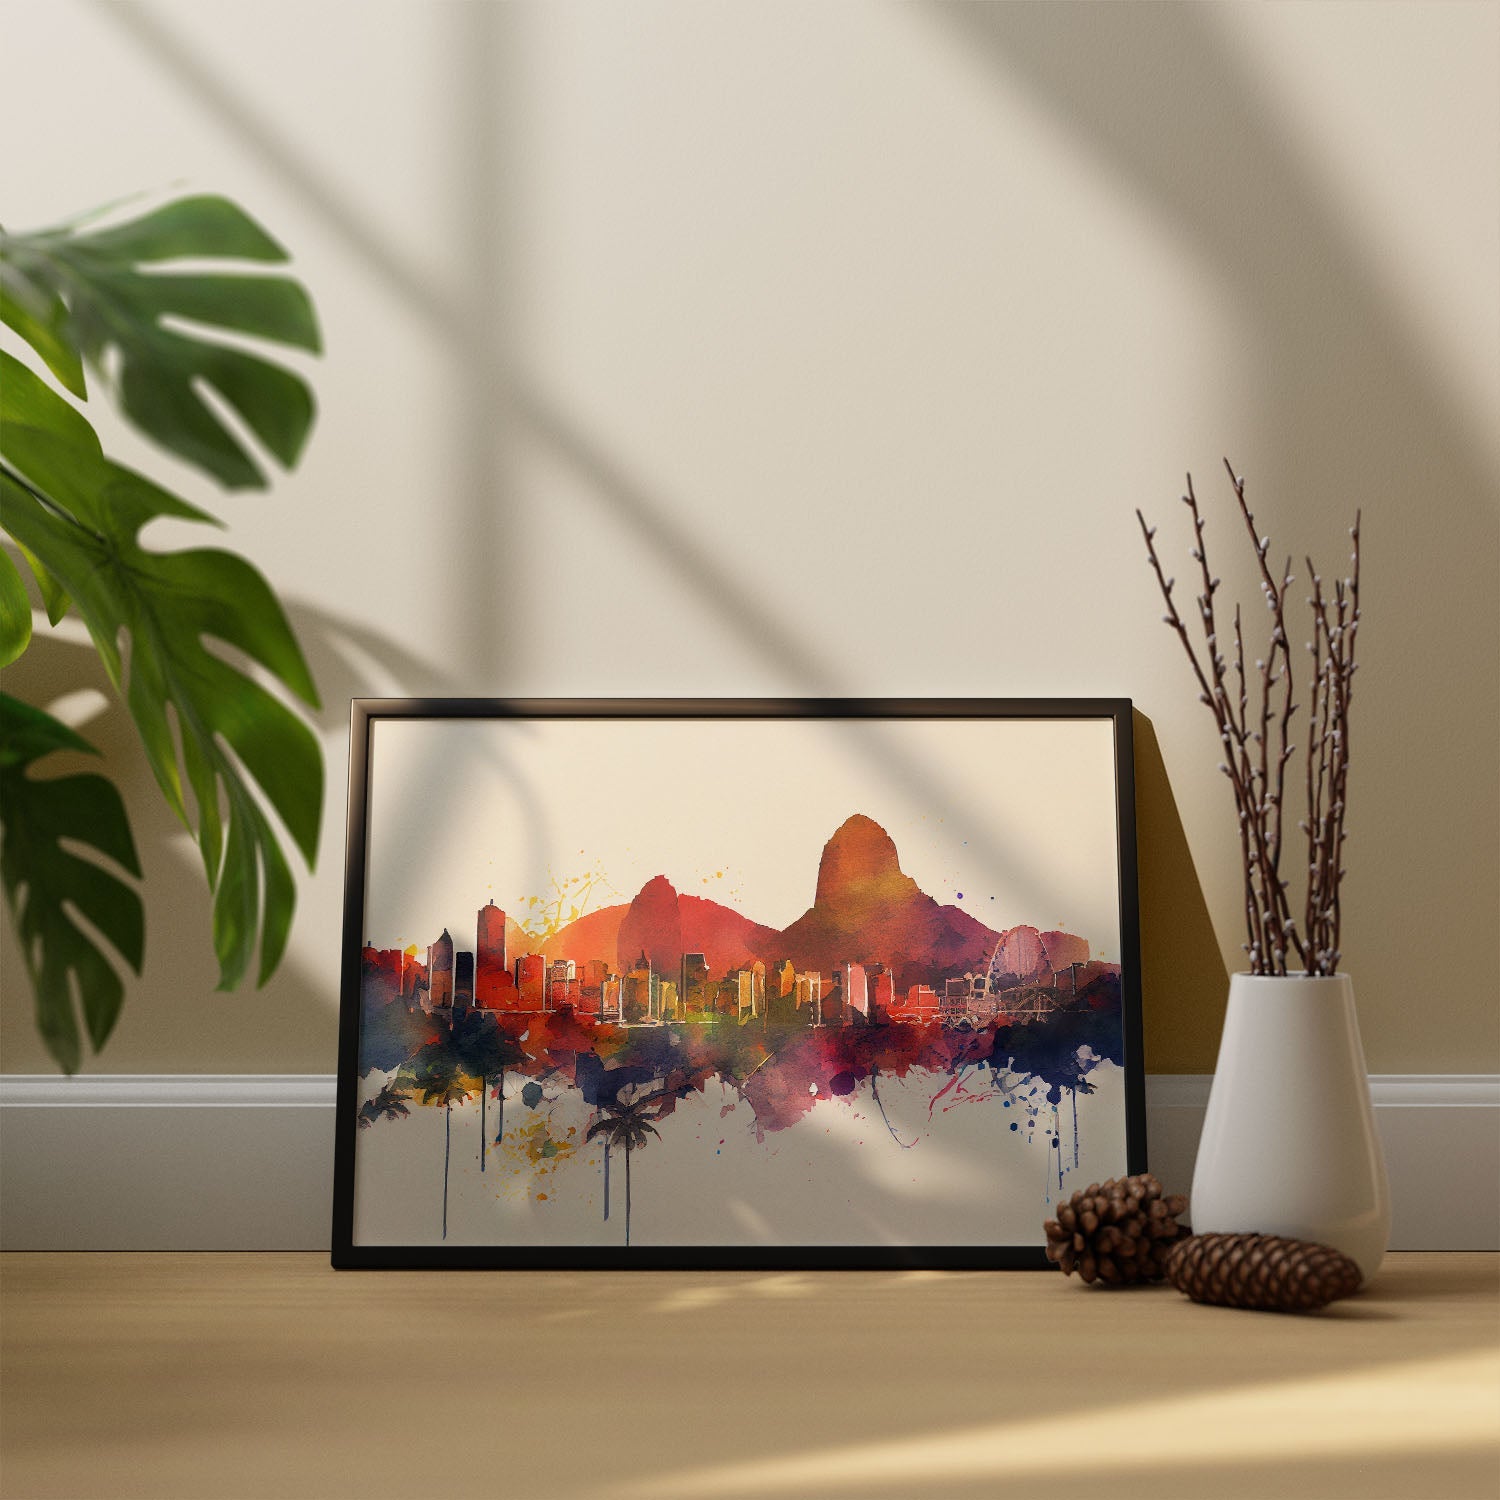 Nacnic watercolor of a skyline of the city of Rio de Janeiro_4. Aesthetic Wall Art Prints for Bedroom or Living Room Design.-Artwork-Nacnic-A4-Sin Marco-Nacnic Estudio SL